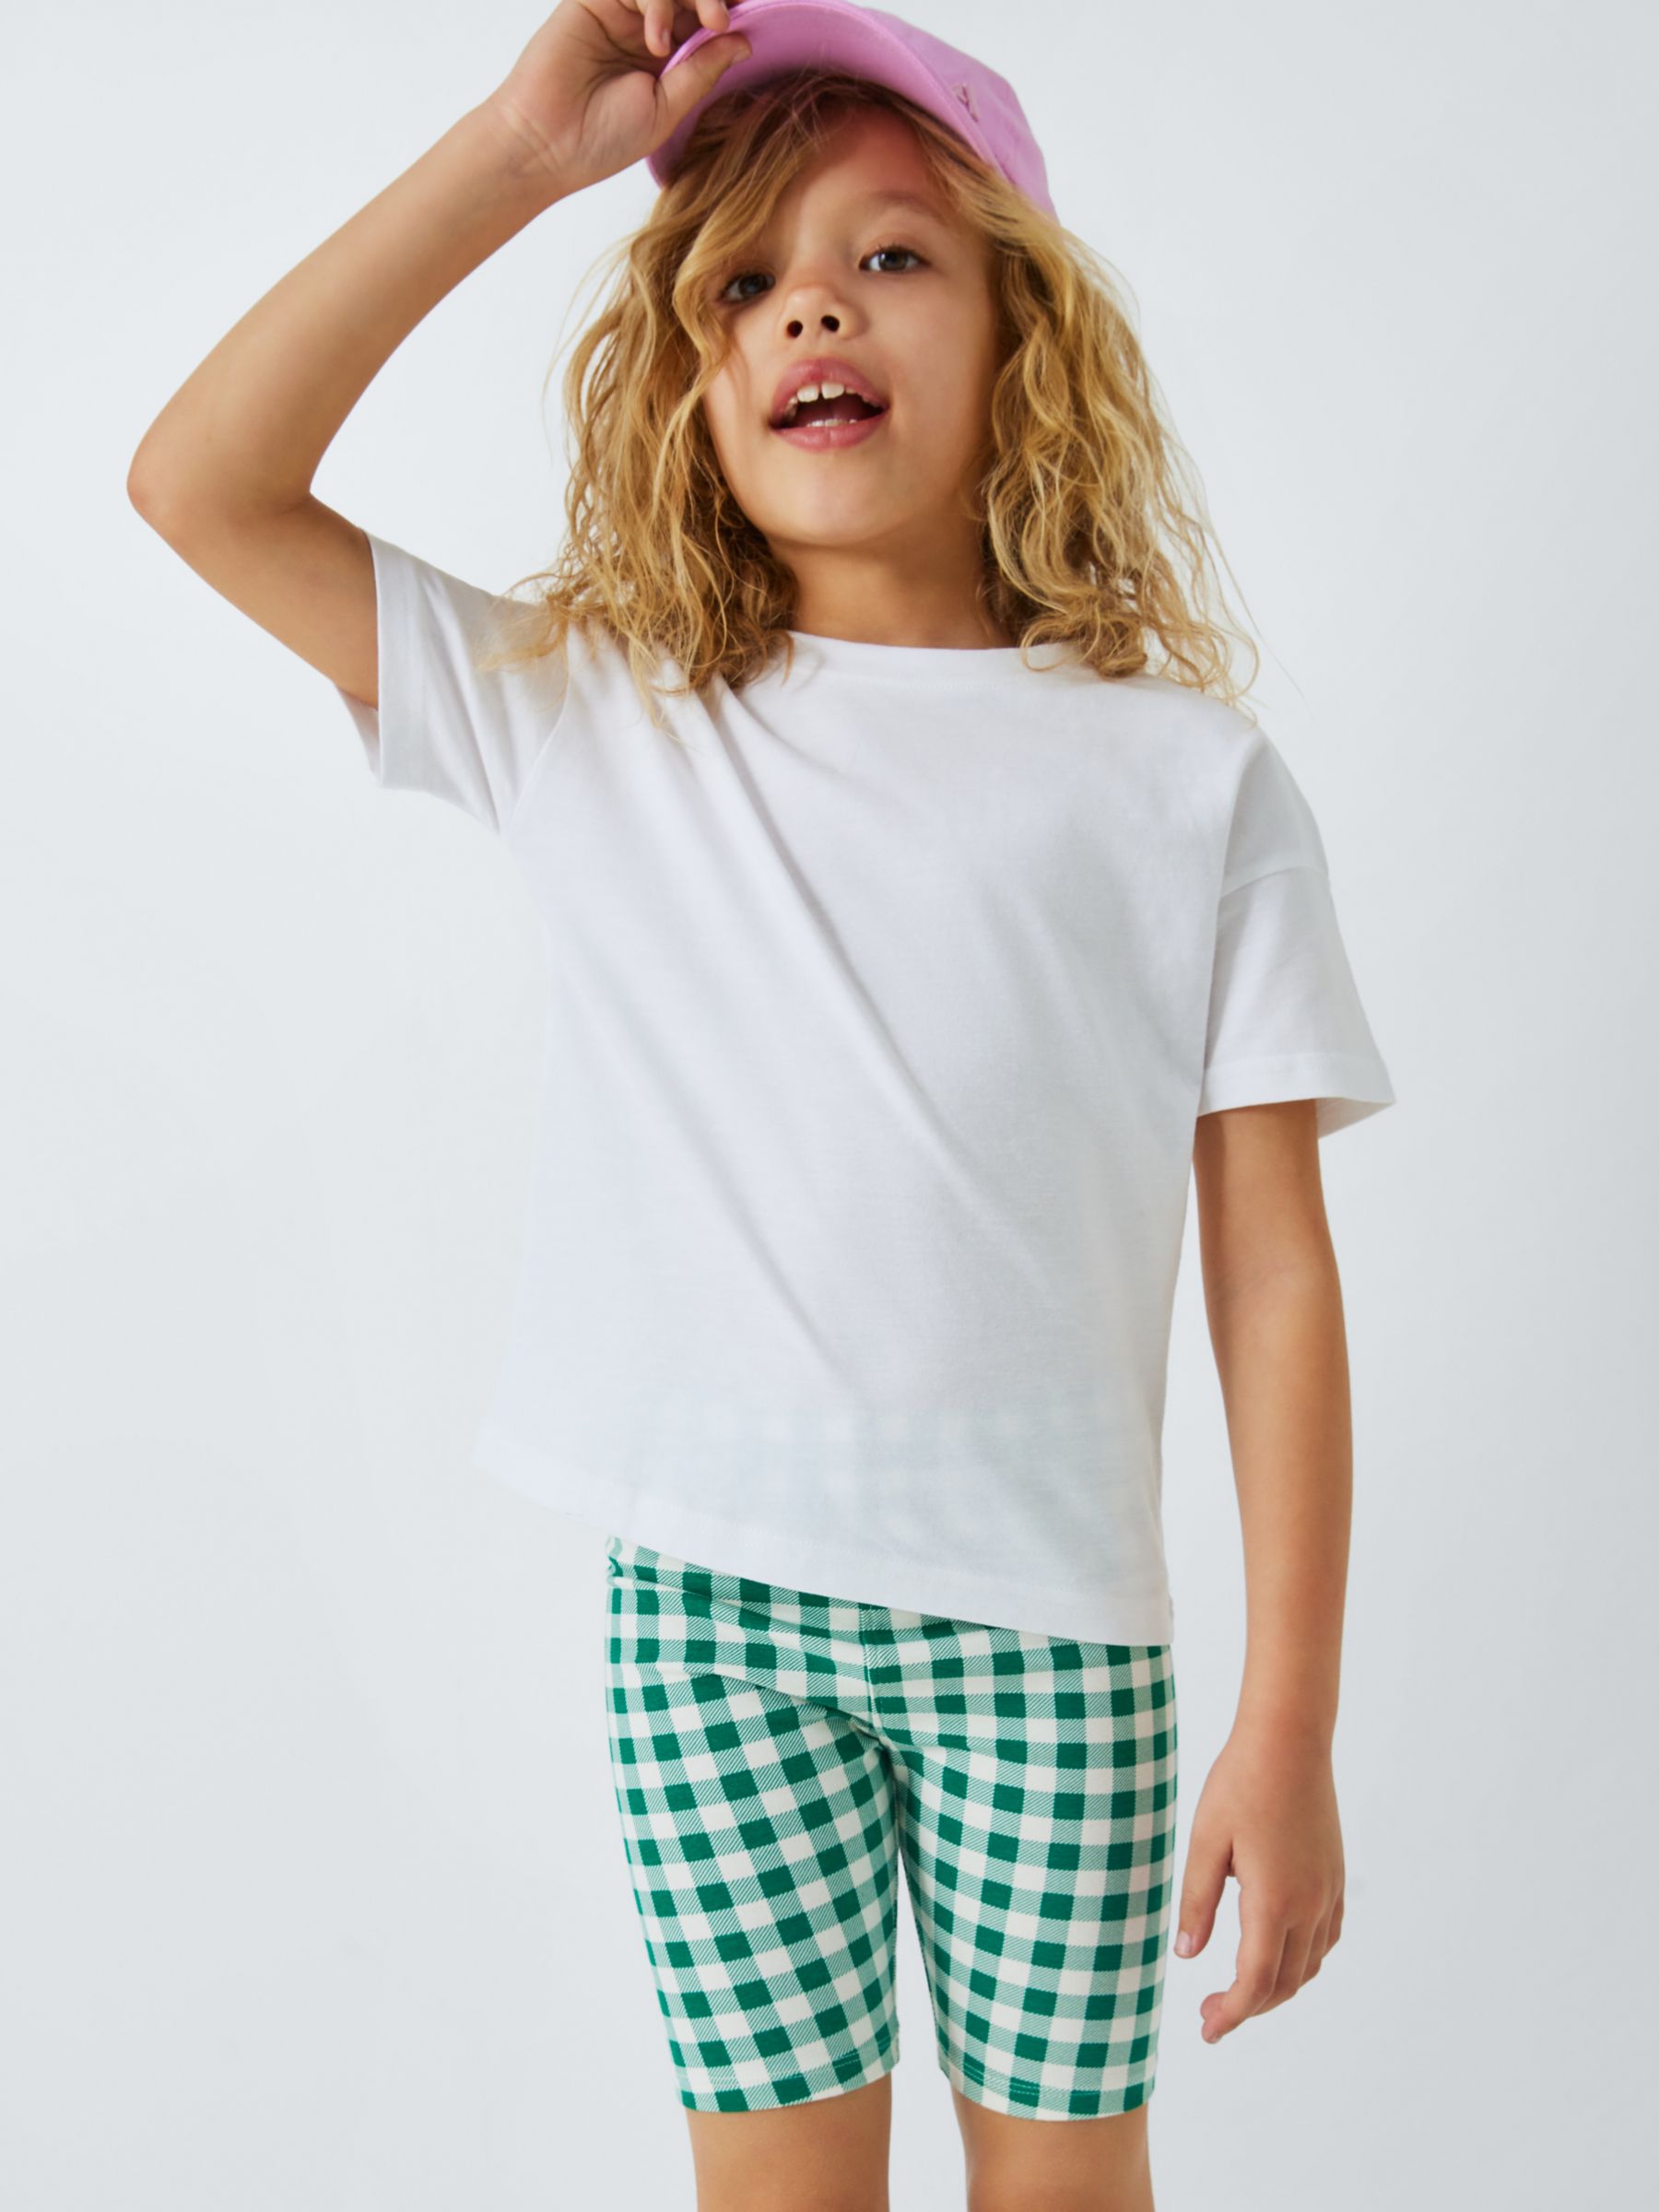 John Lewis ANYDAY Kids' Gingham Cycle Shorts, Lush Meadow, 8 years